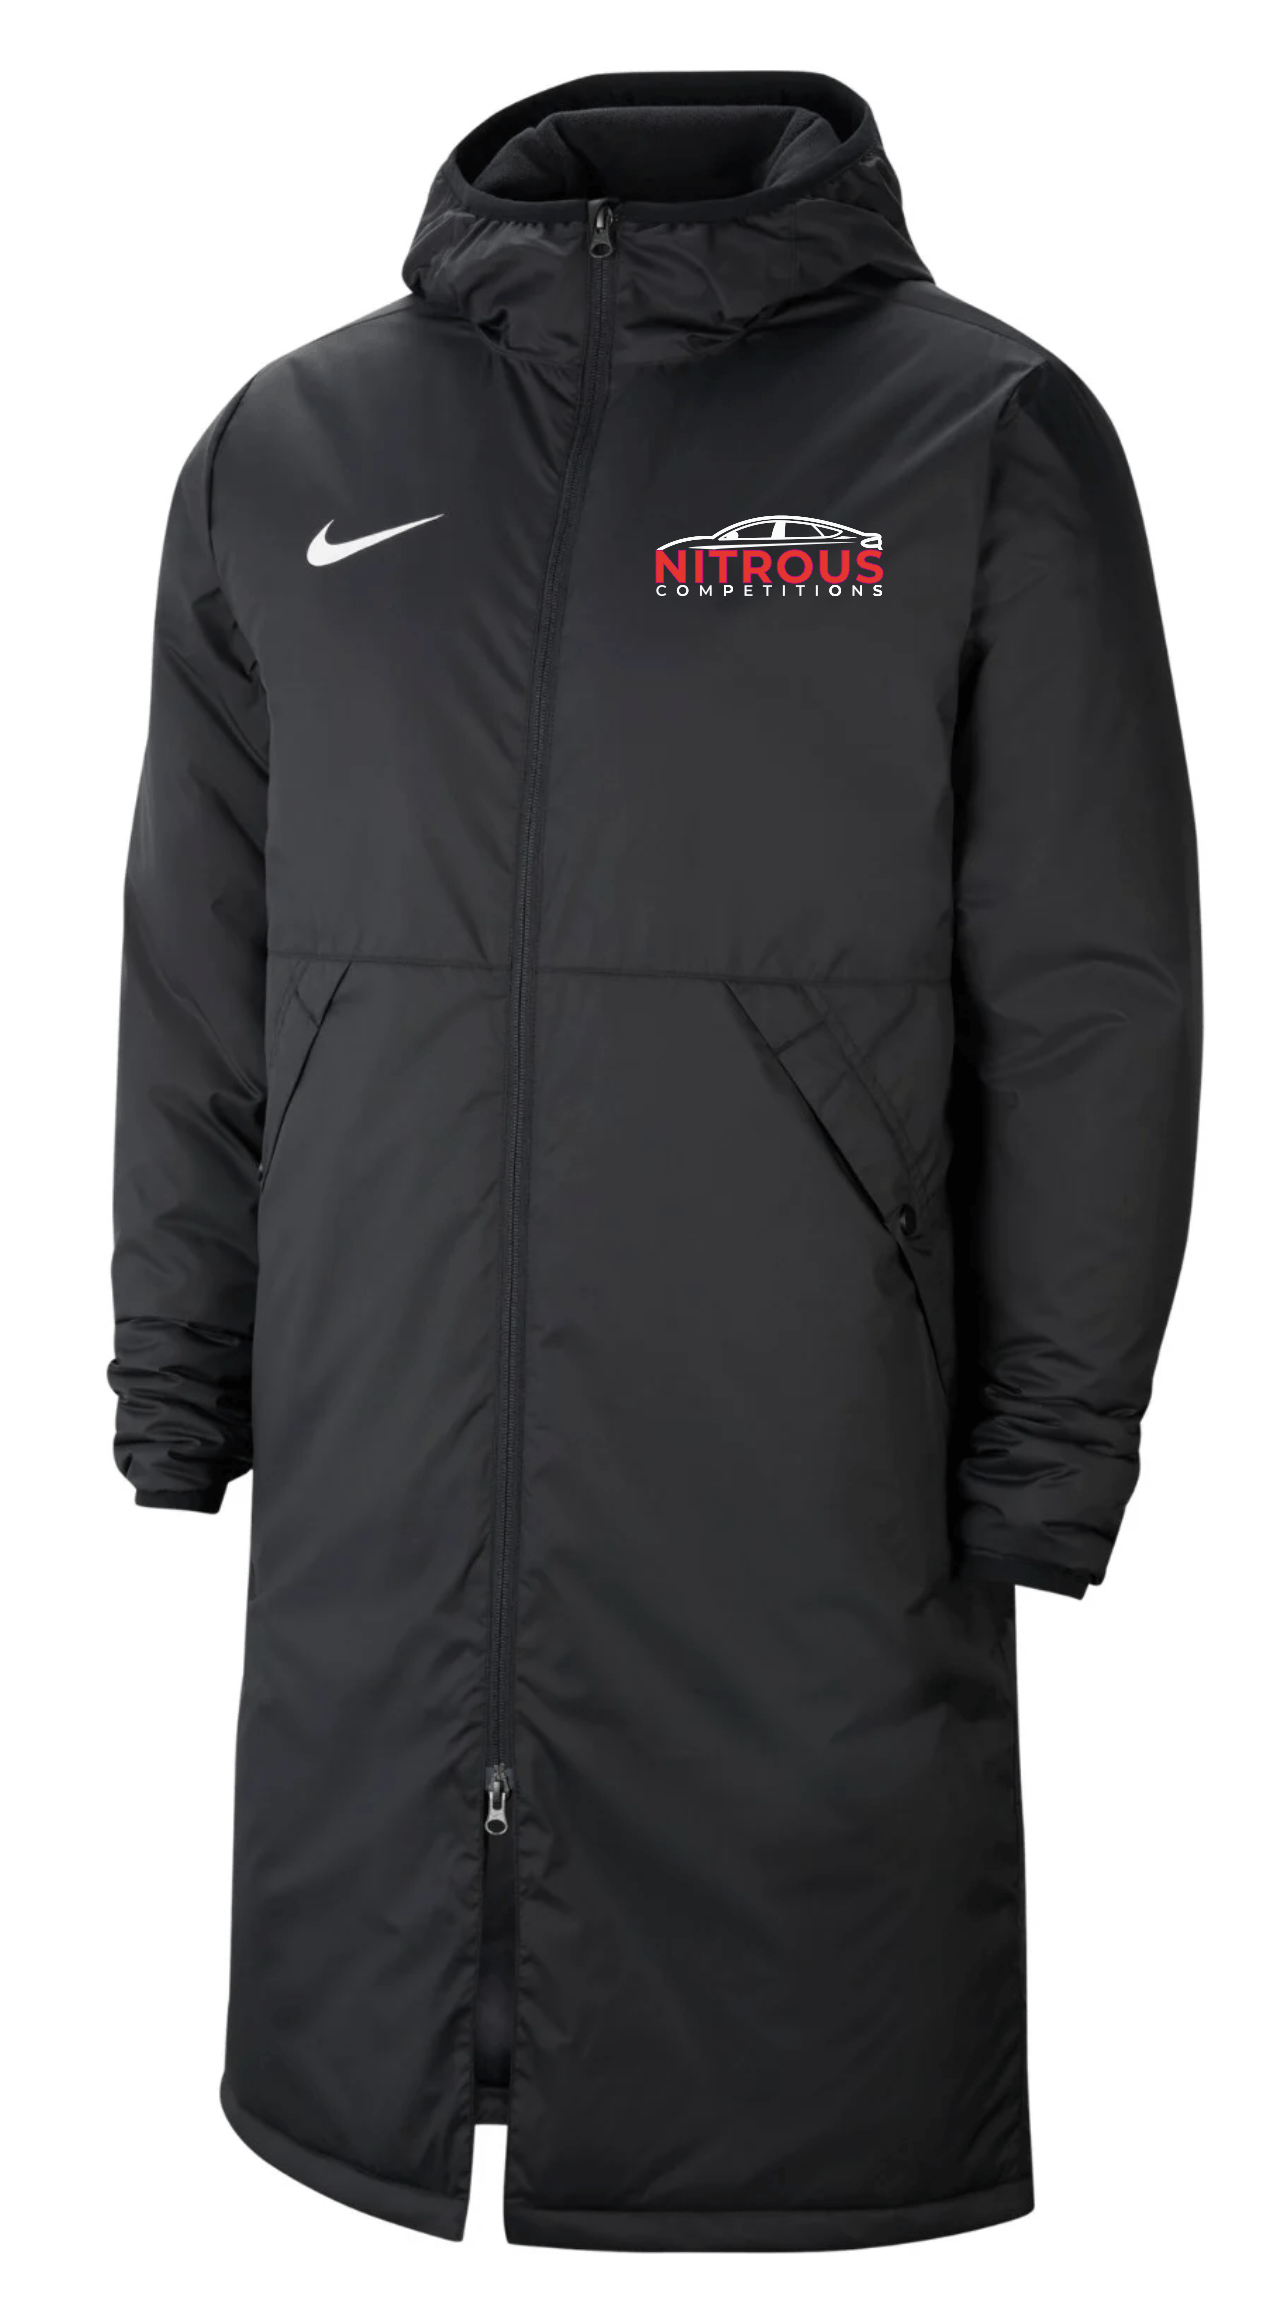 Nitrous Competitions - Nike Team Park 20 winter Jacket. Adults